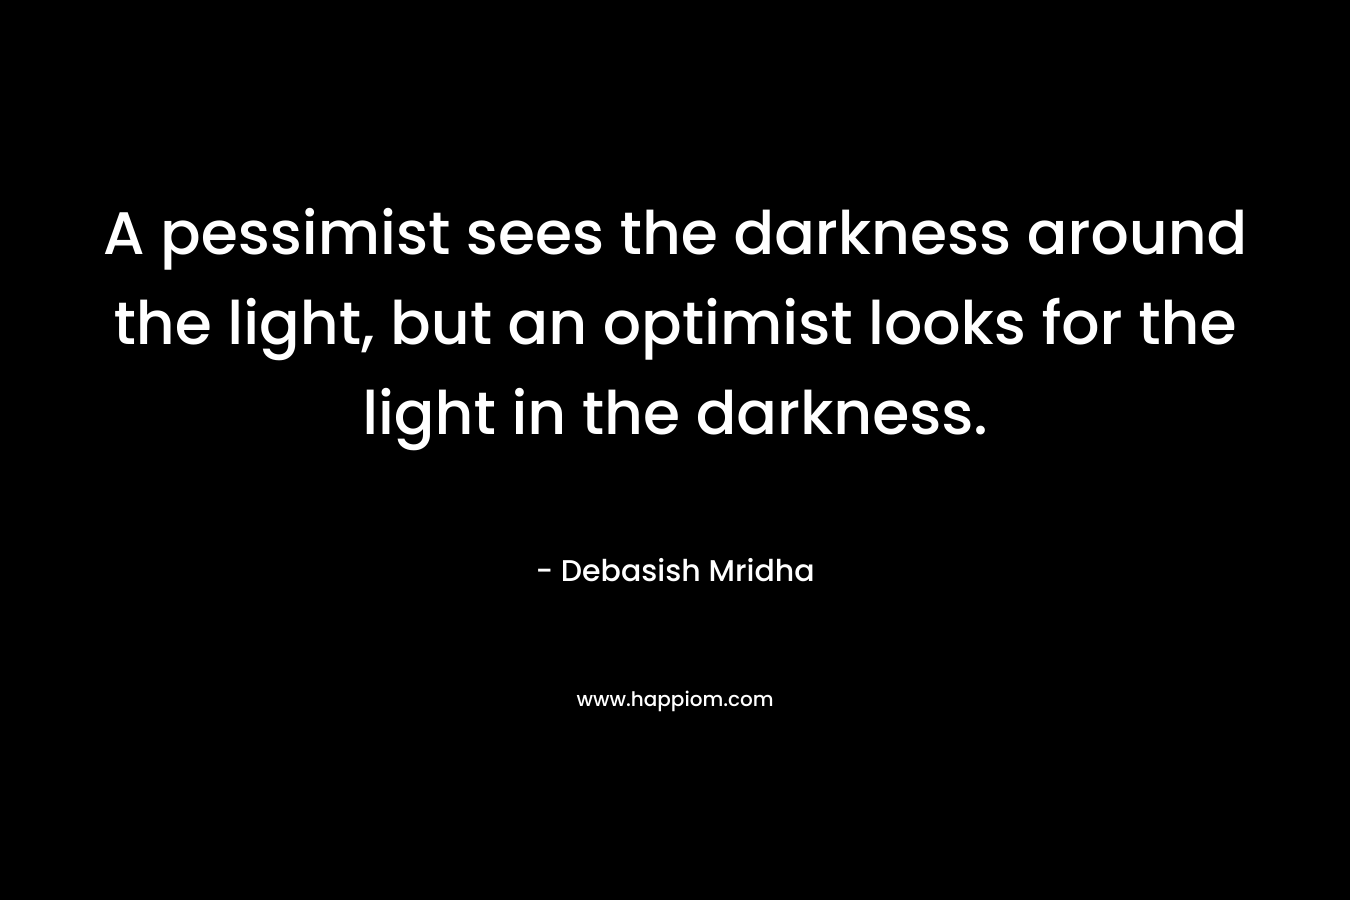 A pessimist sees the darkness around the light, but an optimist looks for the light in the darkness.